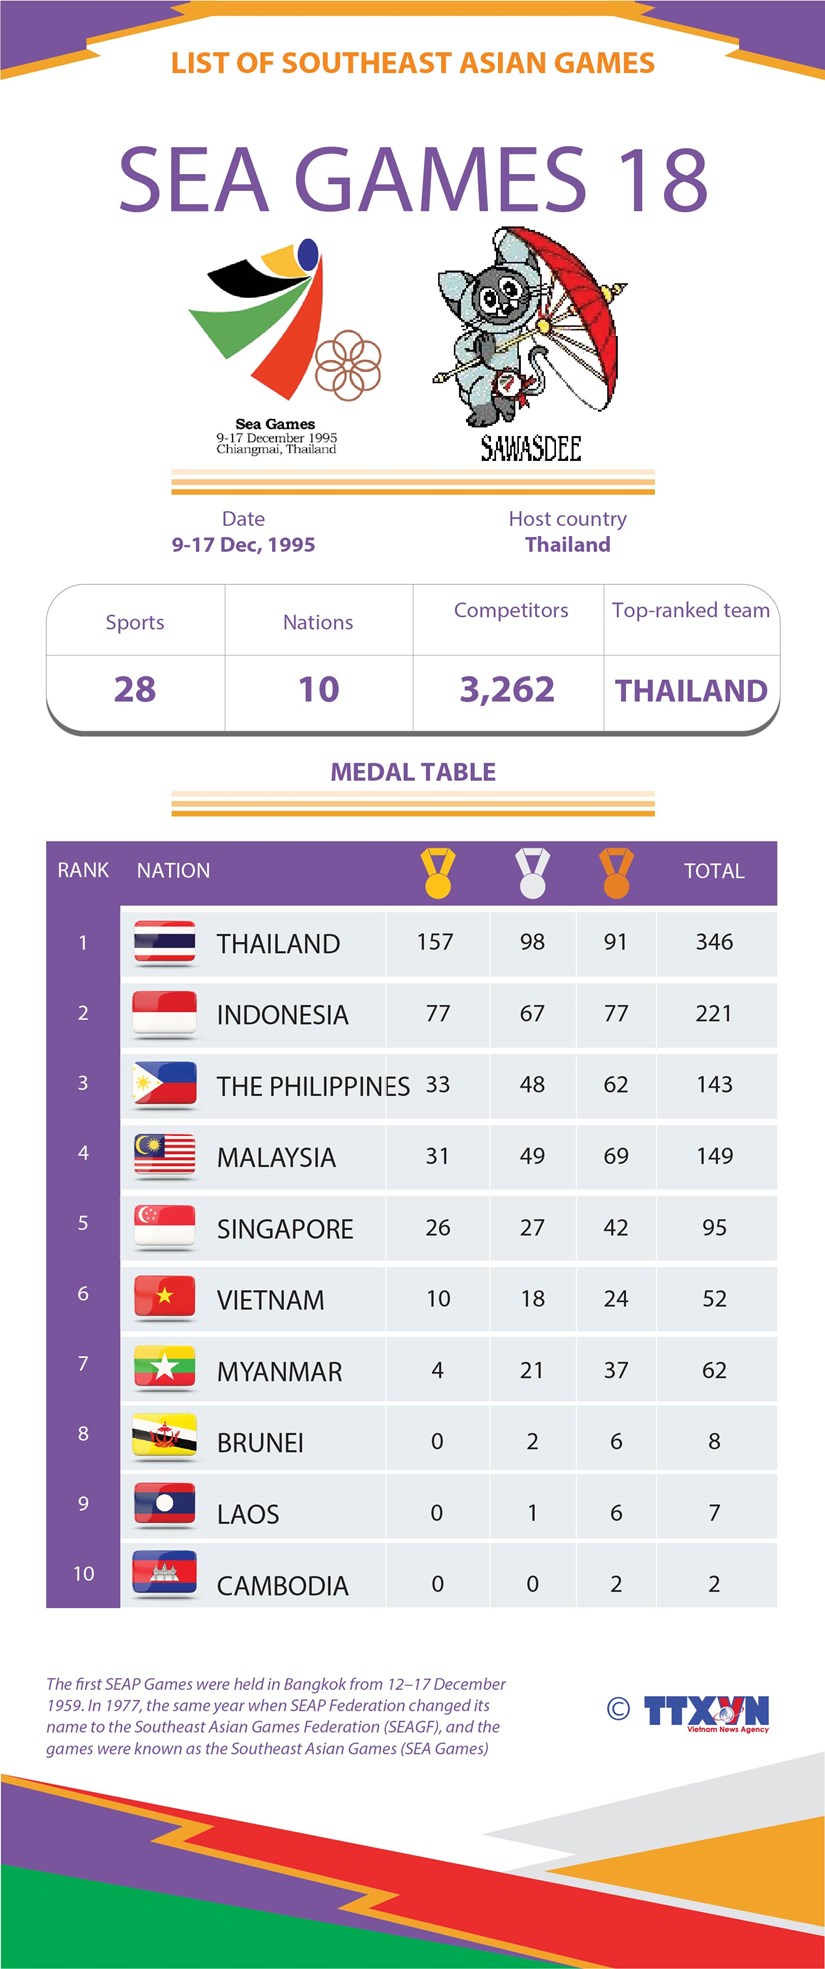 List of Southeast Asian Games: SEA Games 18 hinh anh 1